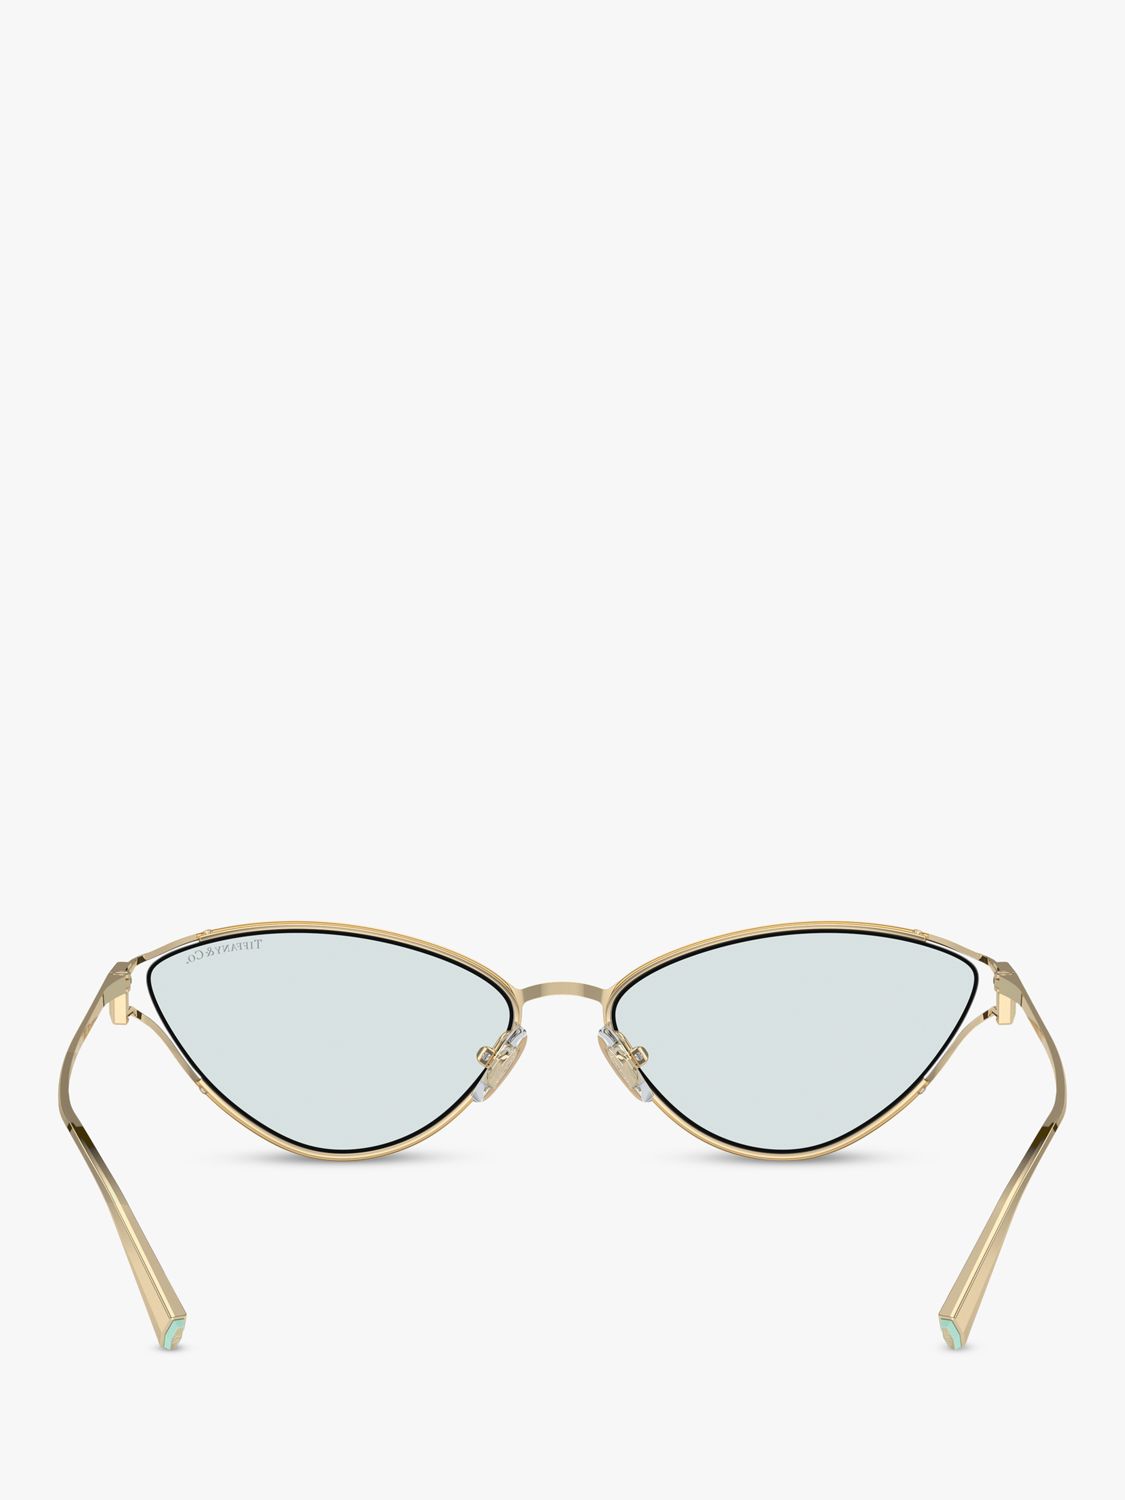 Buy Tiffany & Co TF3095 Women's Cat's Eye Sunglasses, Pale Gold/Blue Online at johnlewis.com